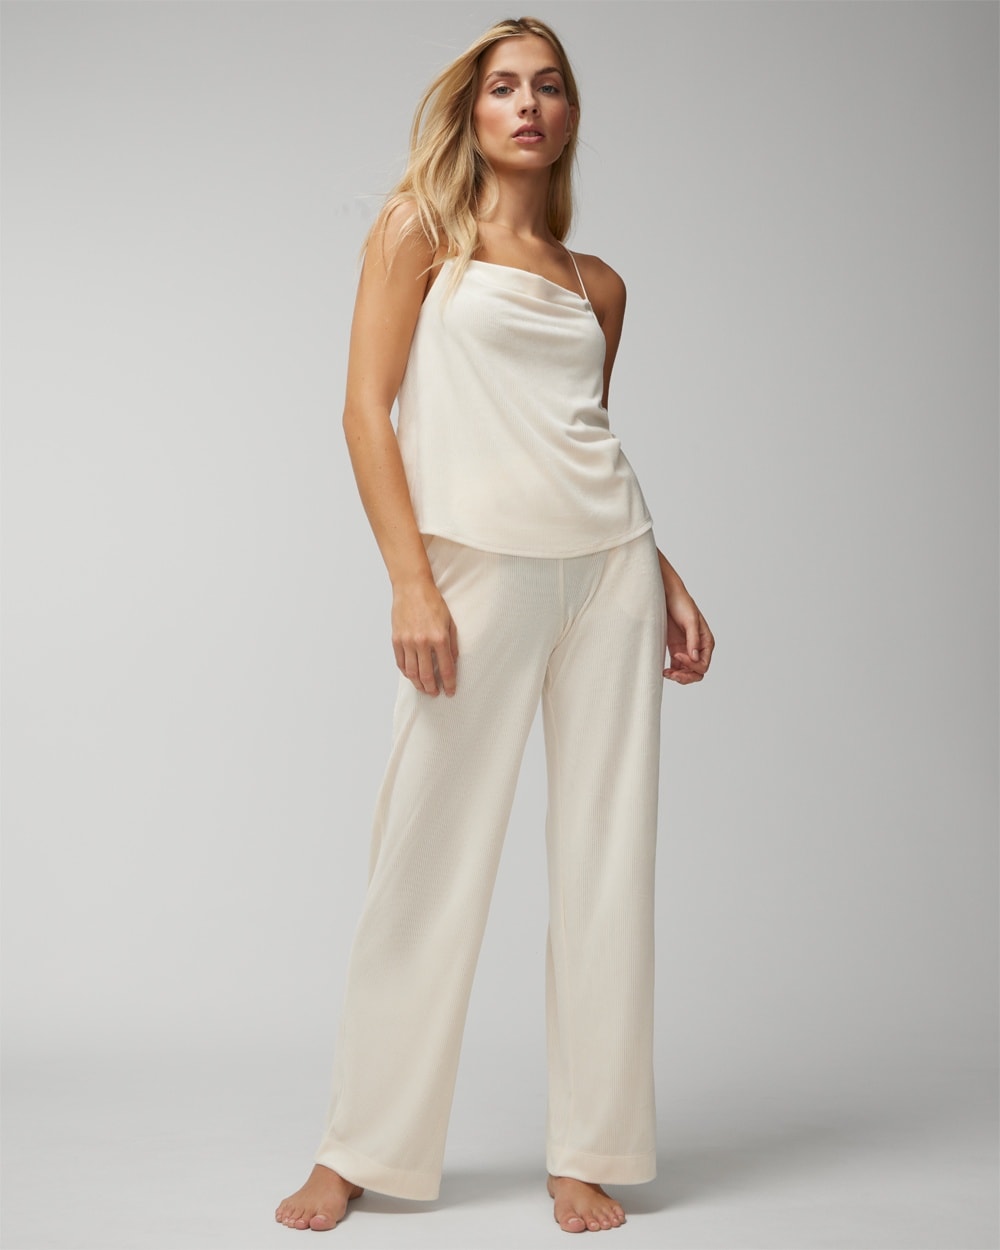 Velvety Ribbed Wide-Leg Pants video preview image, click to start video